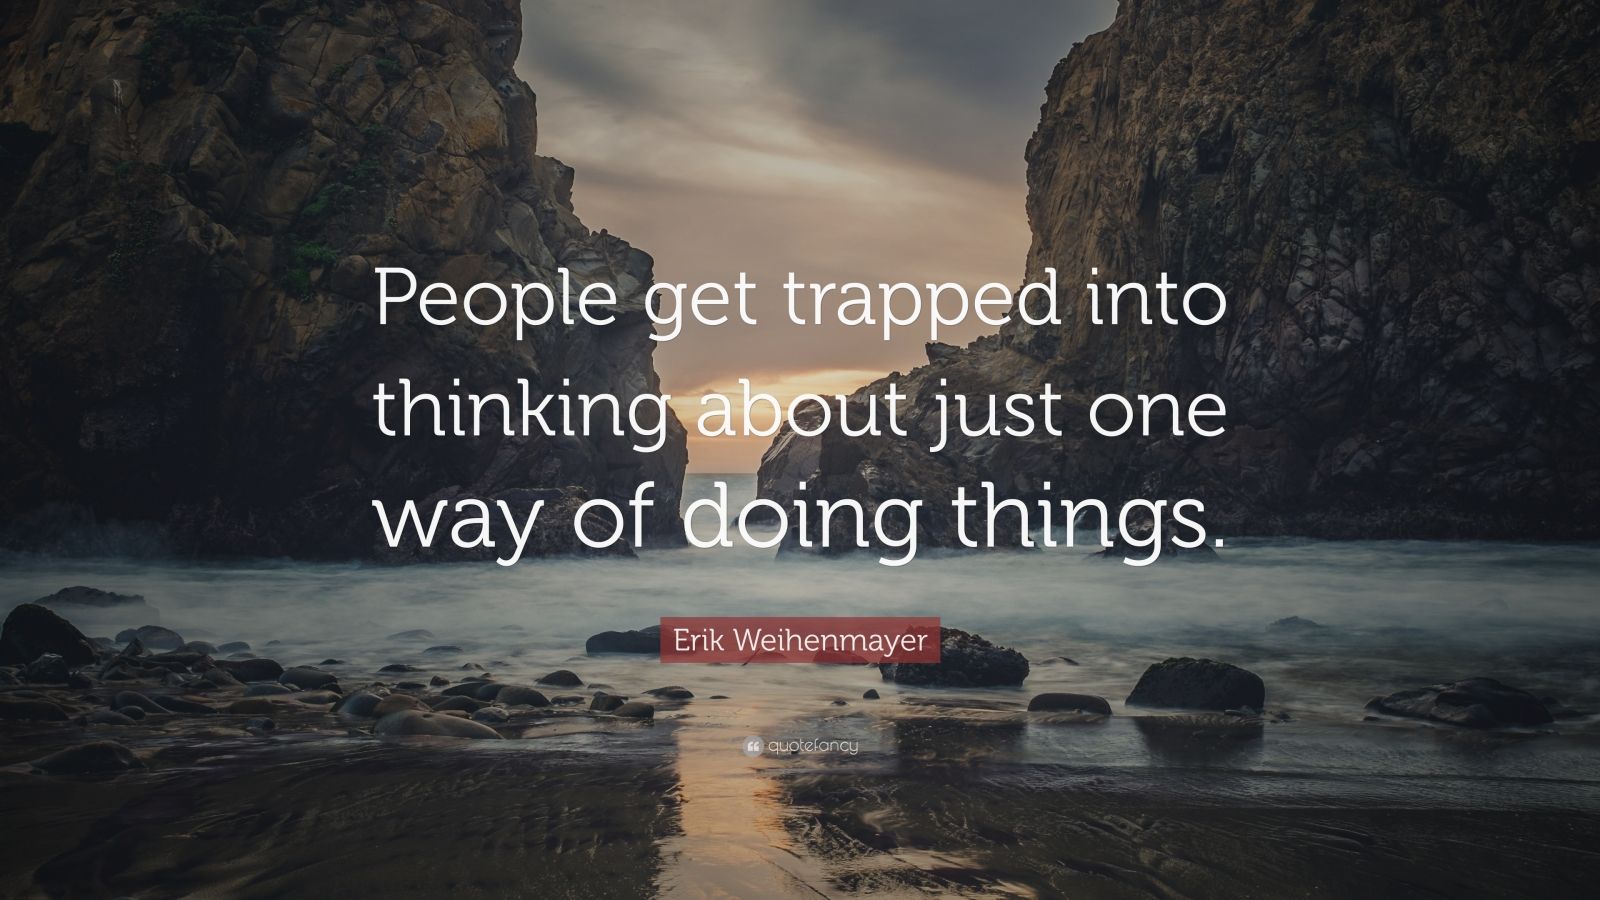 Erik Weihenmayer Quote: "People get trapped into thinking about just one way of doing things ...